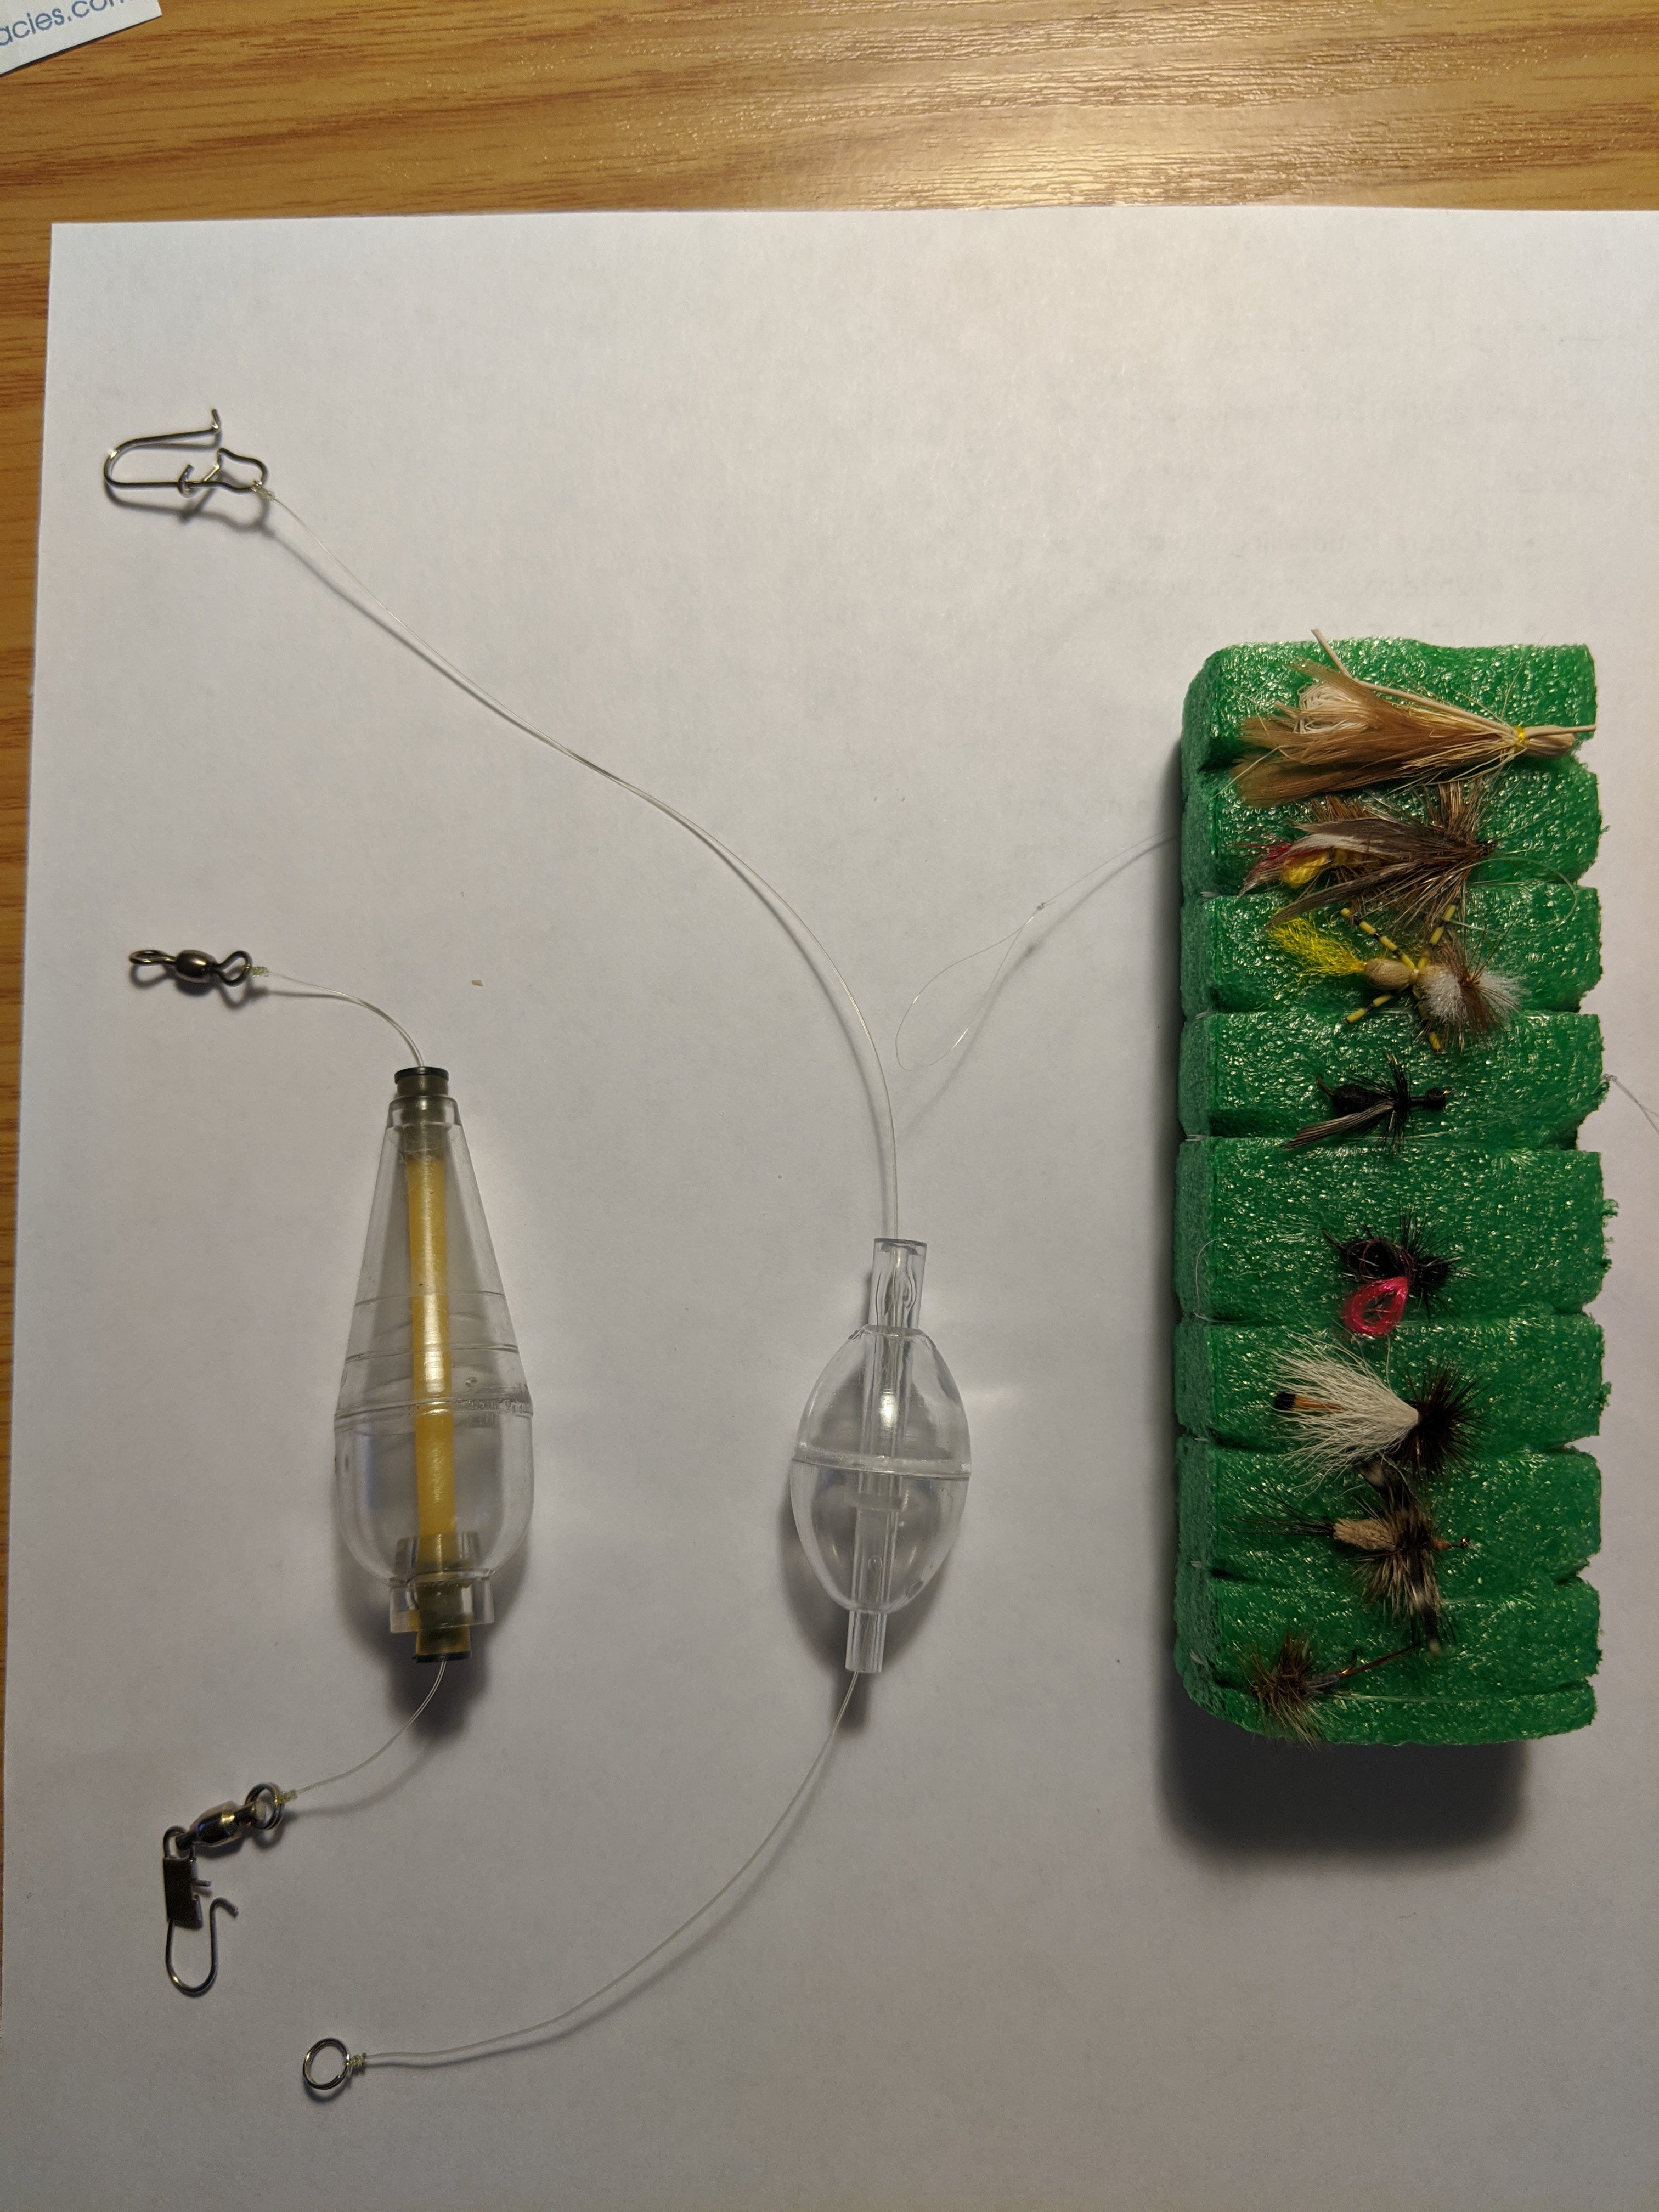 Casting float bubble for panfish?